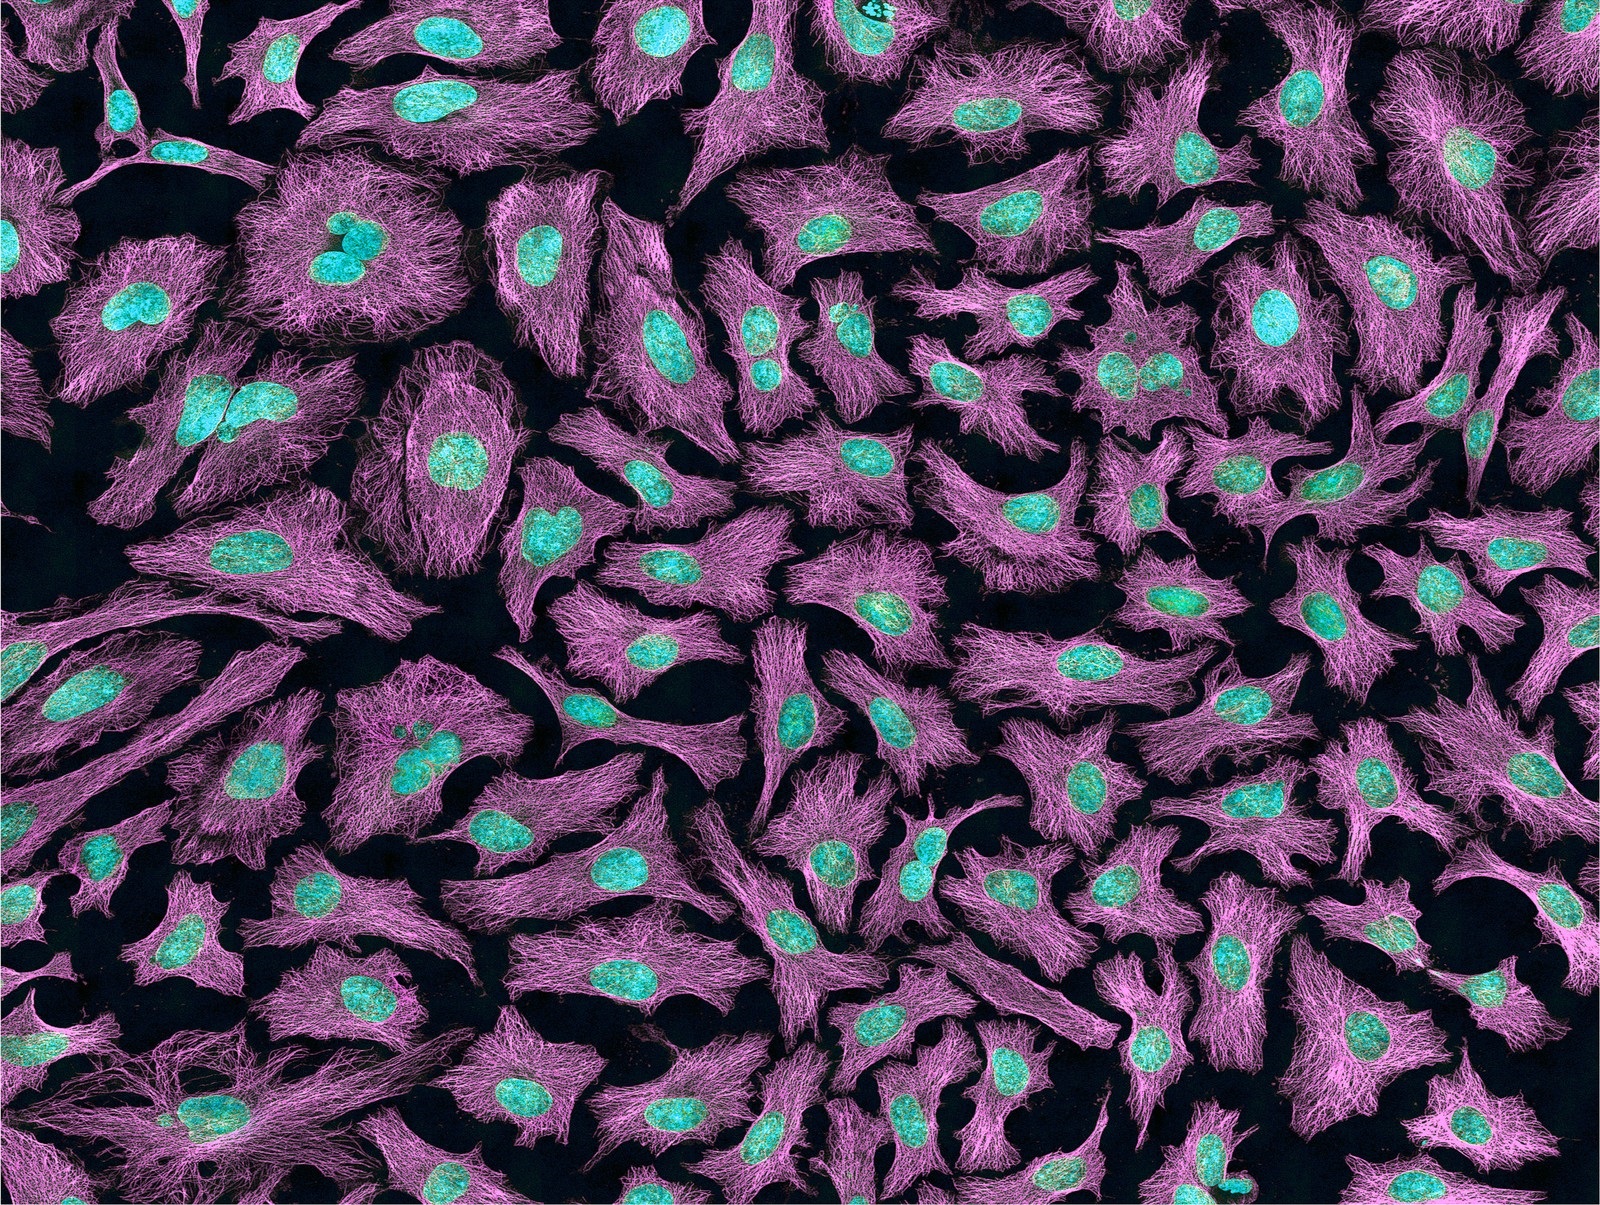 These cells come from the human body and are being used to study cancer and other diseases. The nucleus and DNA inside each cell look blue. The purple shows “microtubules,” which are cell parts that help cells keep their shape and serve as “roads” along which other cell parts travel. This image was taken using a multiphoton fluorescence microscope. (Photo via NIH) 